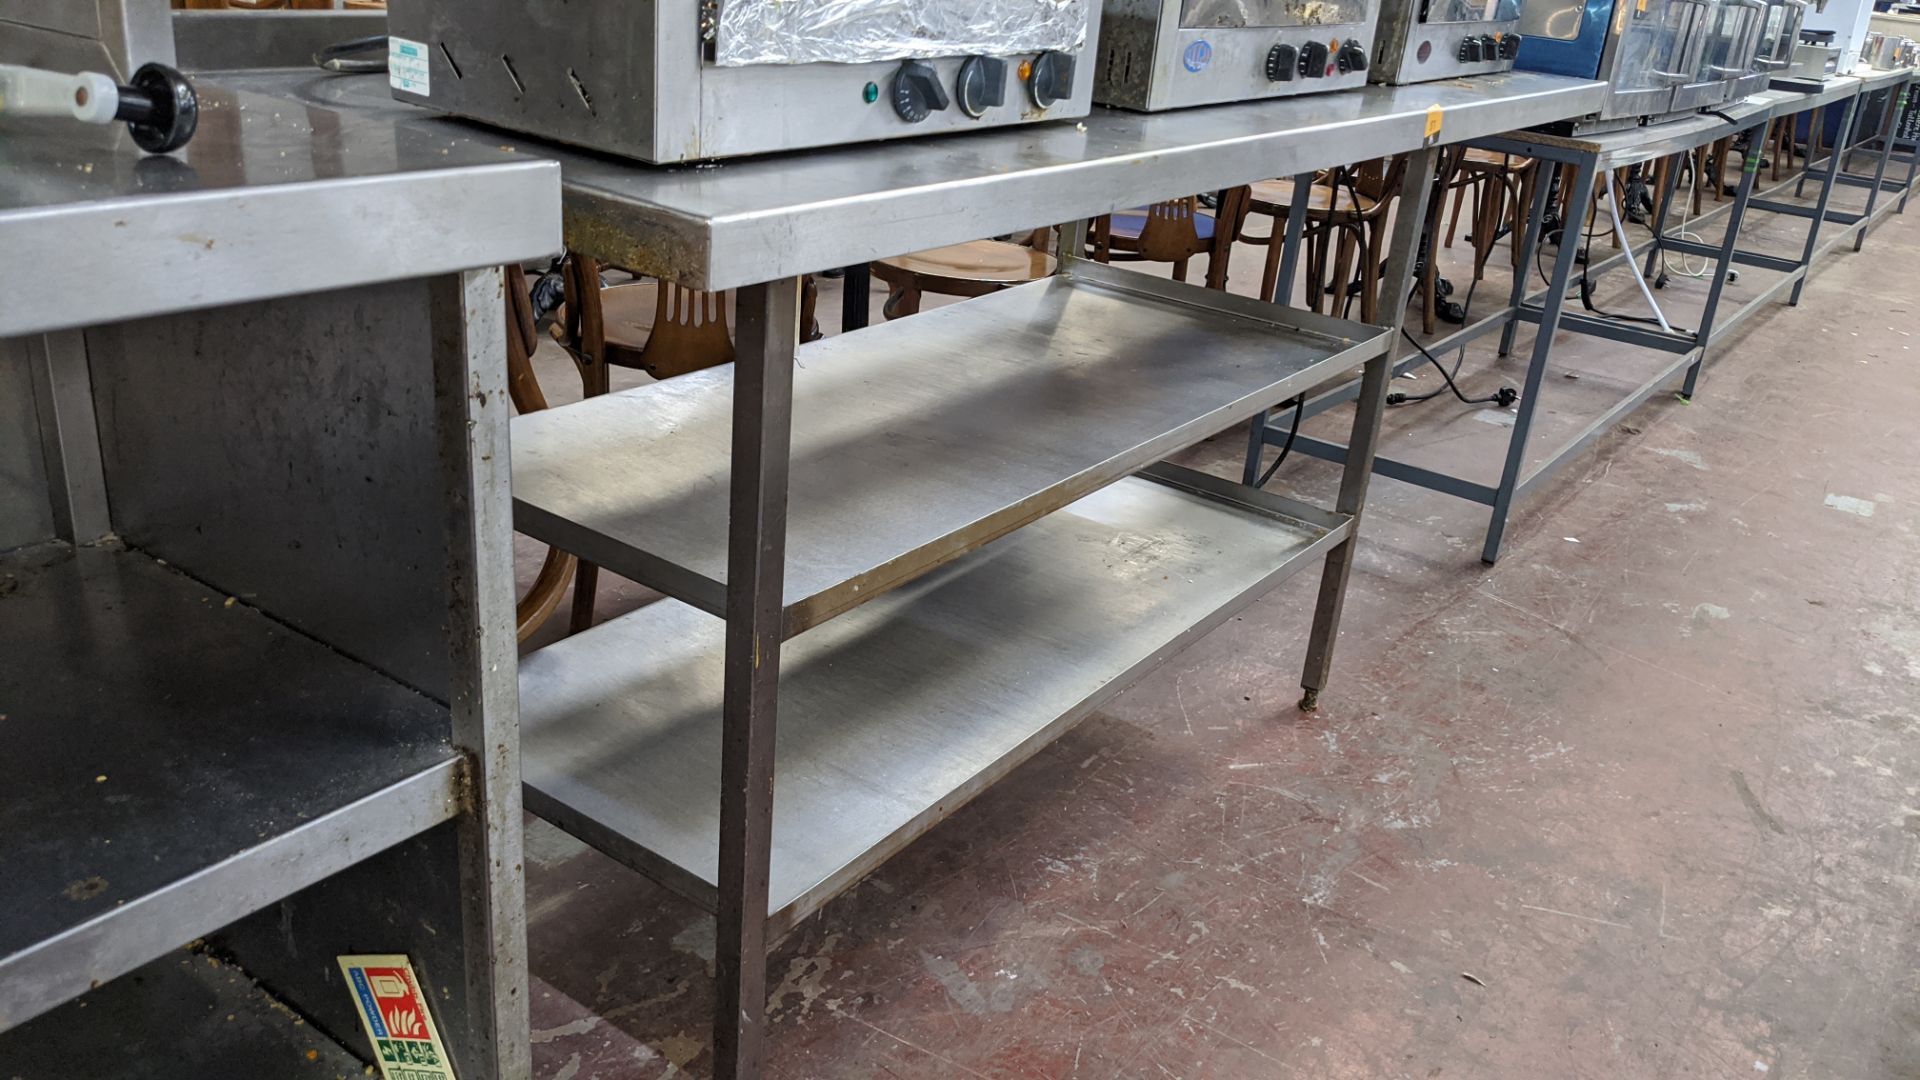 Stainless steel table with shelves across approx. two thirds of the base. Table top measures approx - Image 2 of 3